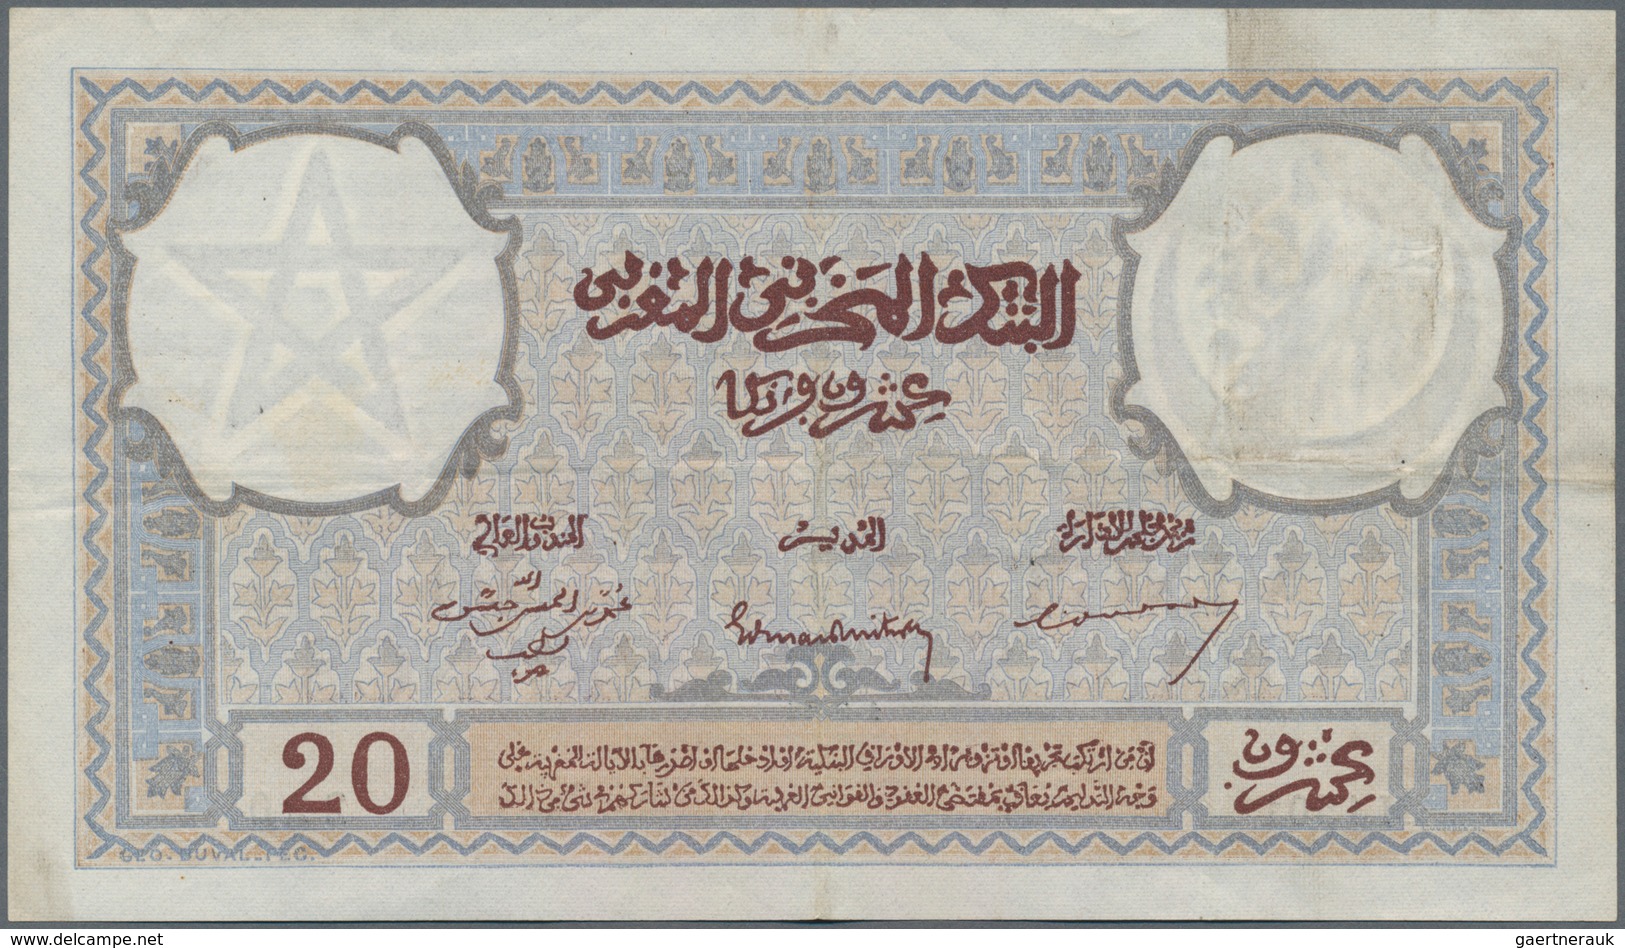 Morocco / Marokko: 20 Francs 1945 P. 18b With Light Folds And Creases In Paper, No Holes Or Tears, P - Marokko